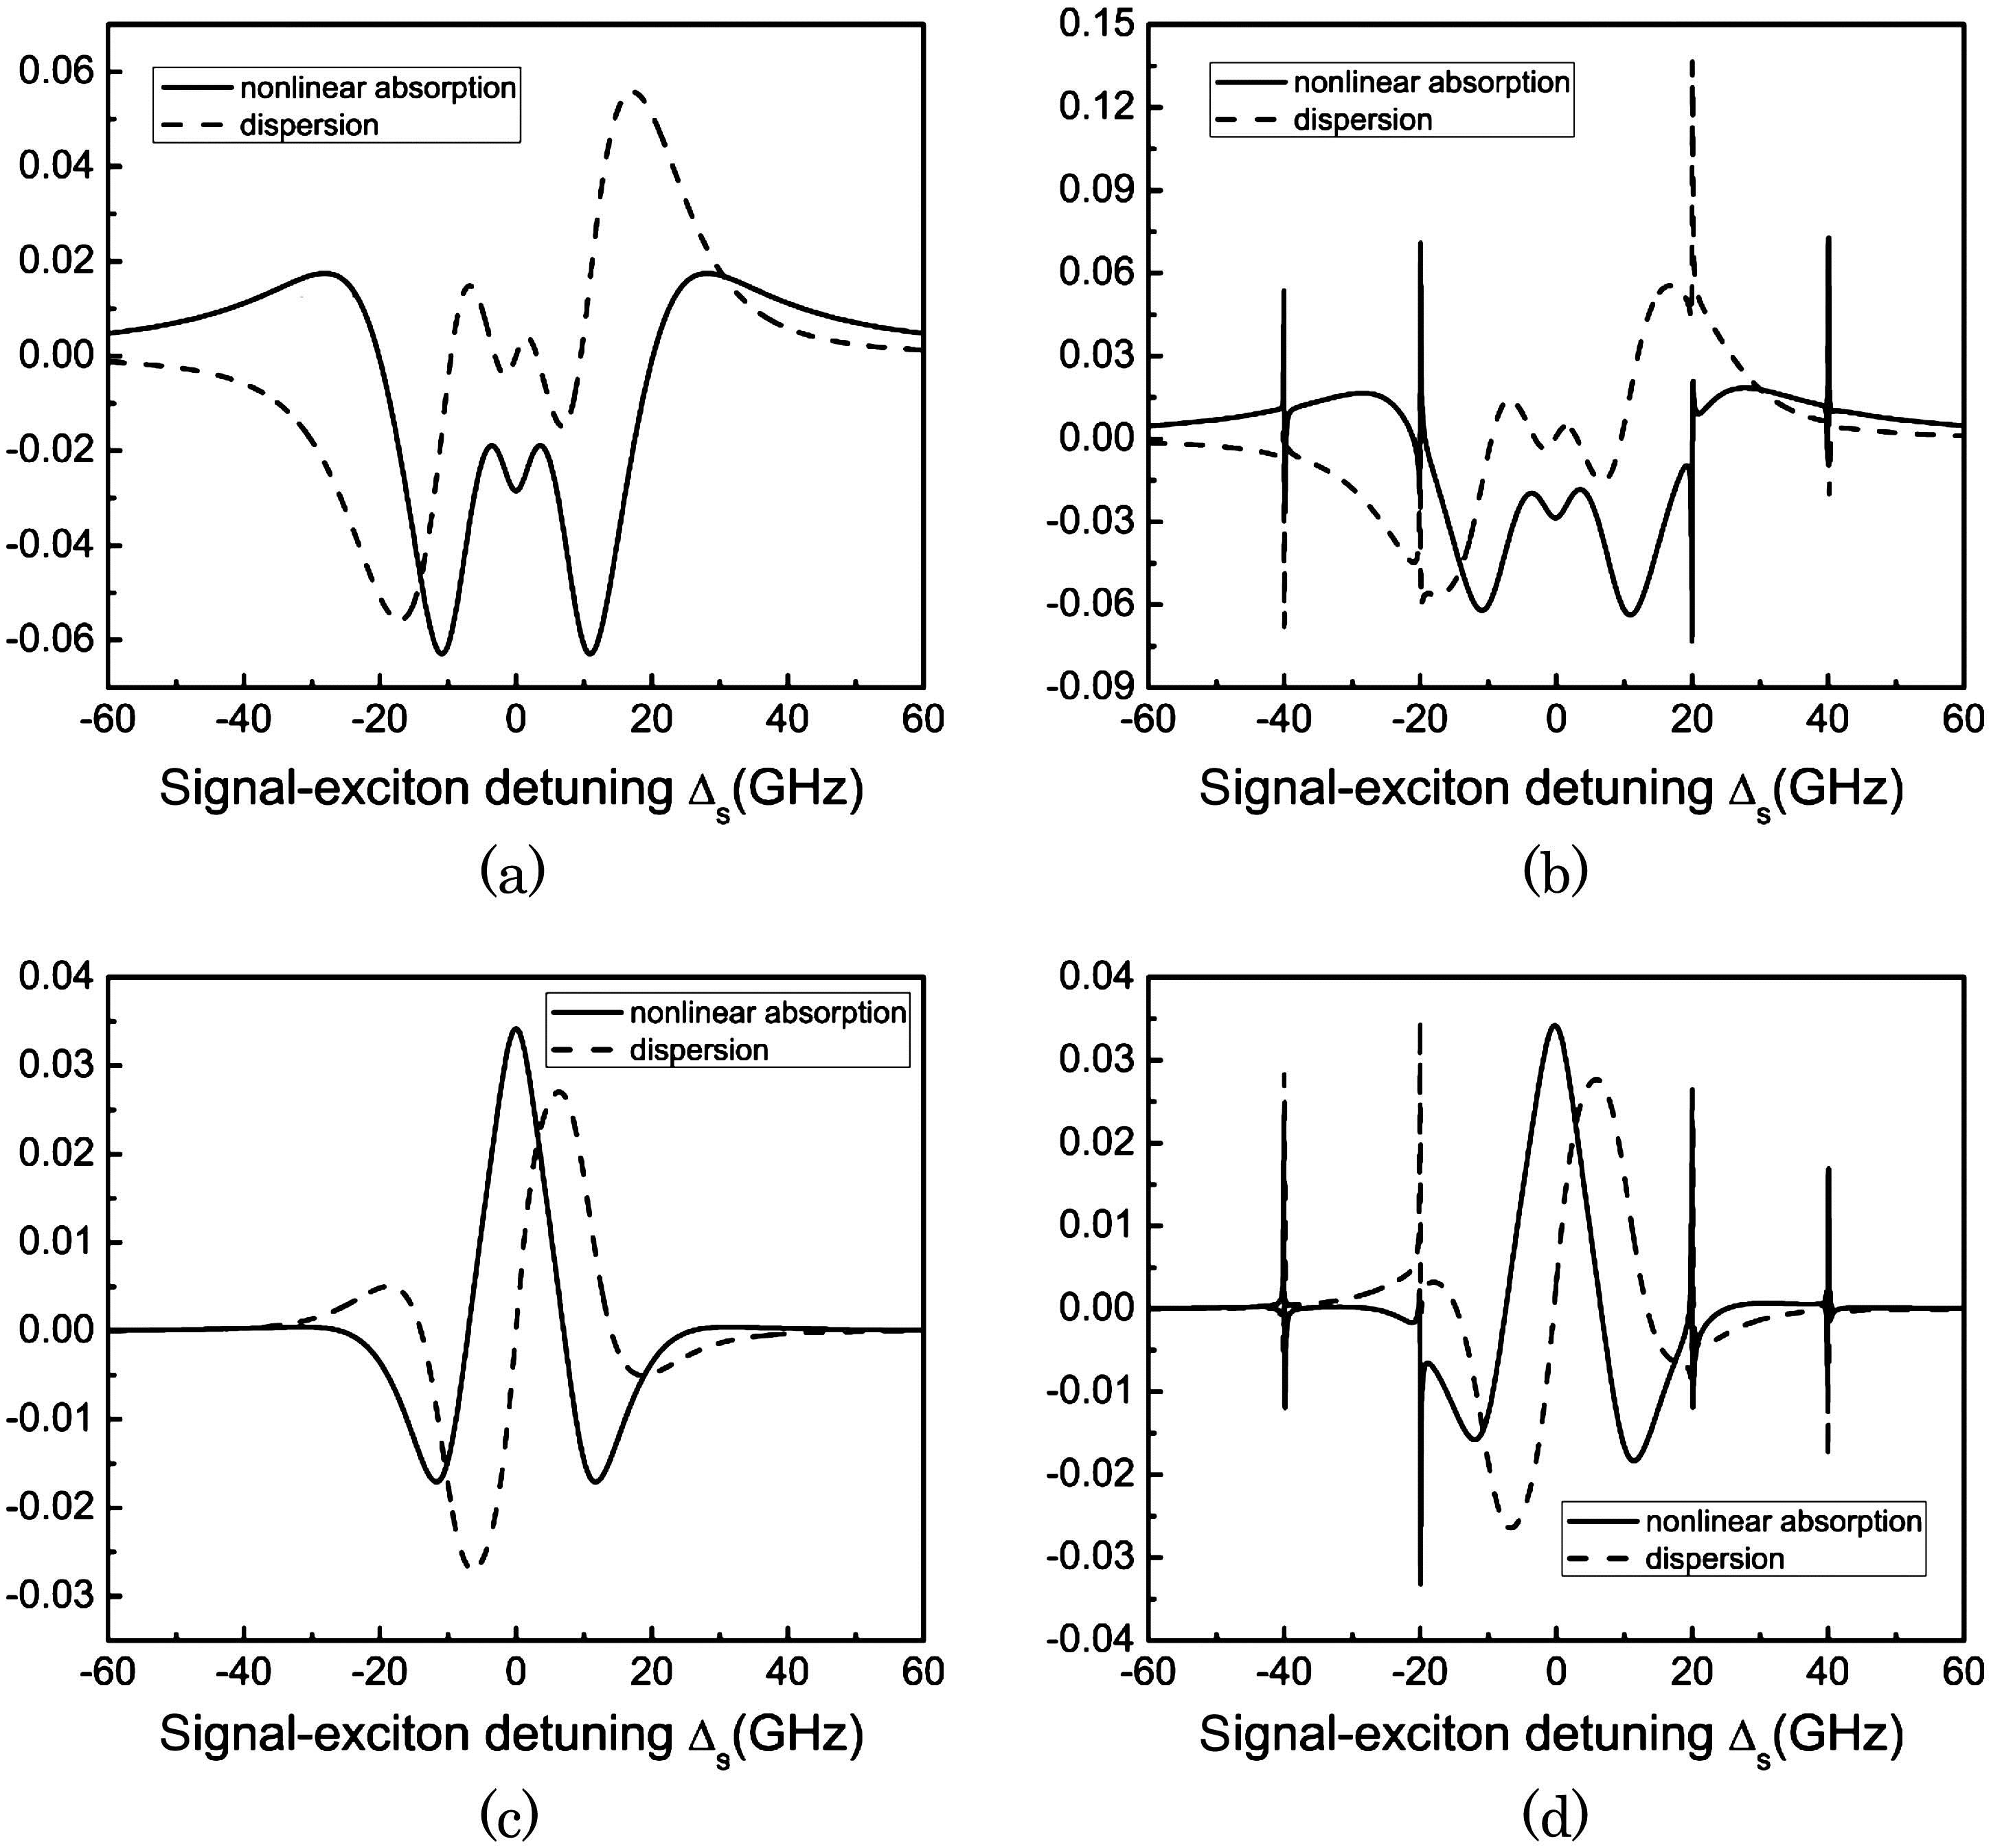 Optical dispersions and nonlinear absorptions (in units of Σ3 and Σ5 for χ(ωp−2ωs)eff(3) and χ(−3ωp+2ωs)eff(5), respectively) with pump beam on-resonance (Δp=0). (a) Third-order optical dispersion and nonlinear absorption as functions of probe-exciton detuning Δs in the case λ=0. (b) Third-order optical dispersion and nonlinear absorption as functions of probe-exciton detuning Δs in the case λ=2 GHz. (c) Fifth-order optical dispersion and nonlinear absorption as functions of probe-exciton detuning Δs in the case λ=0. (d) Fifth-order optical dispersion and nonlinear absorption as functions of probe-exciton detuning Δs in the case λ=2 GHz.